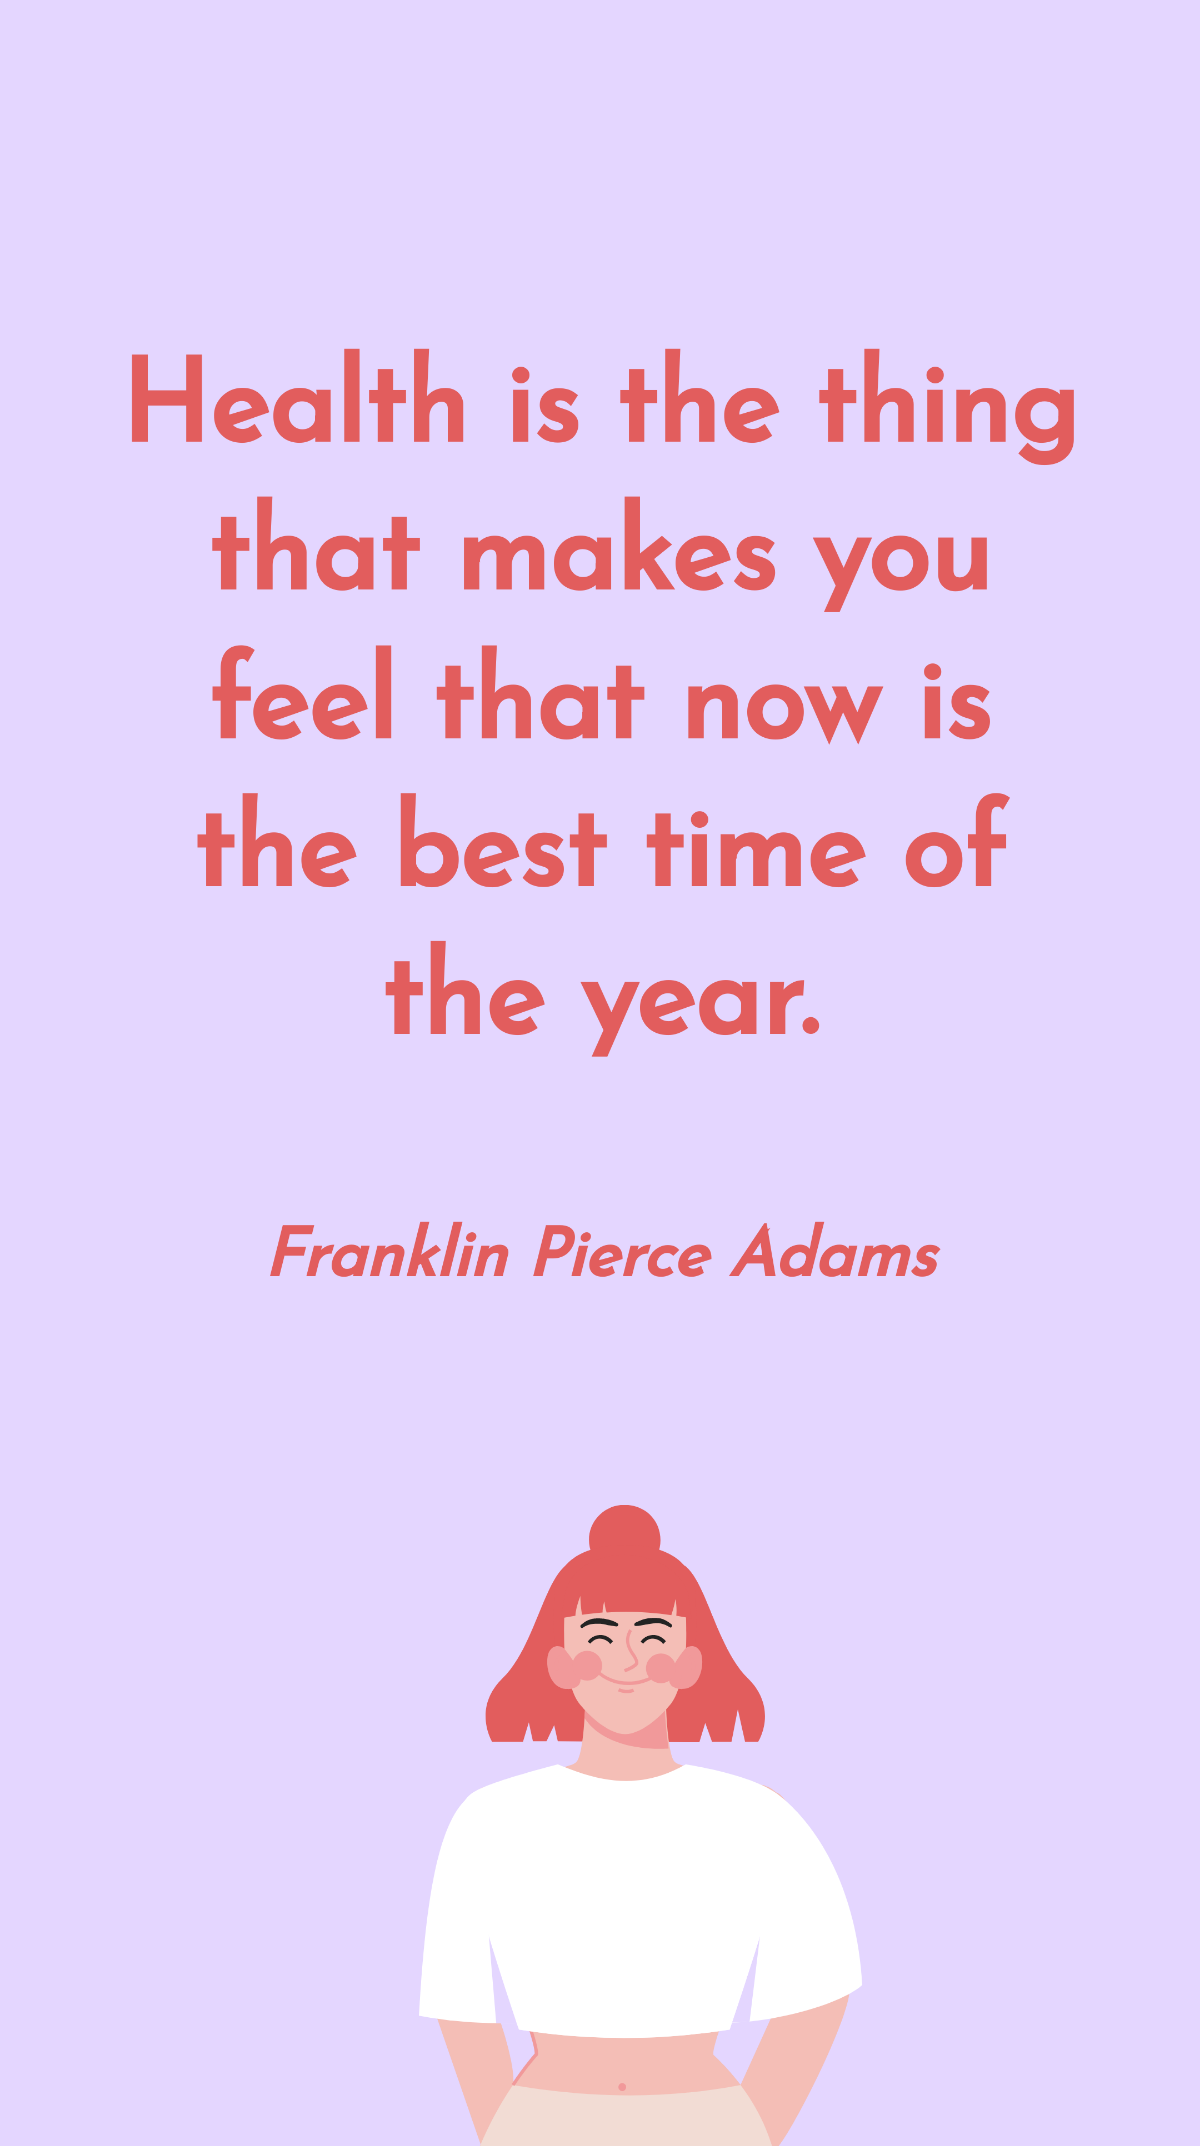 Franklin Pierce Adams - Health is the thing that makes you feel that now is the best time of the year. Template